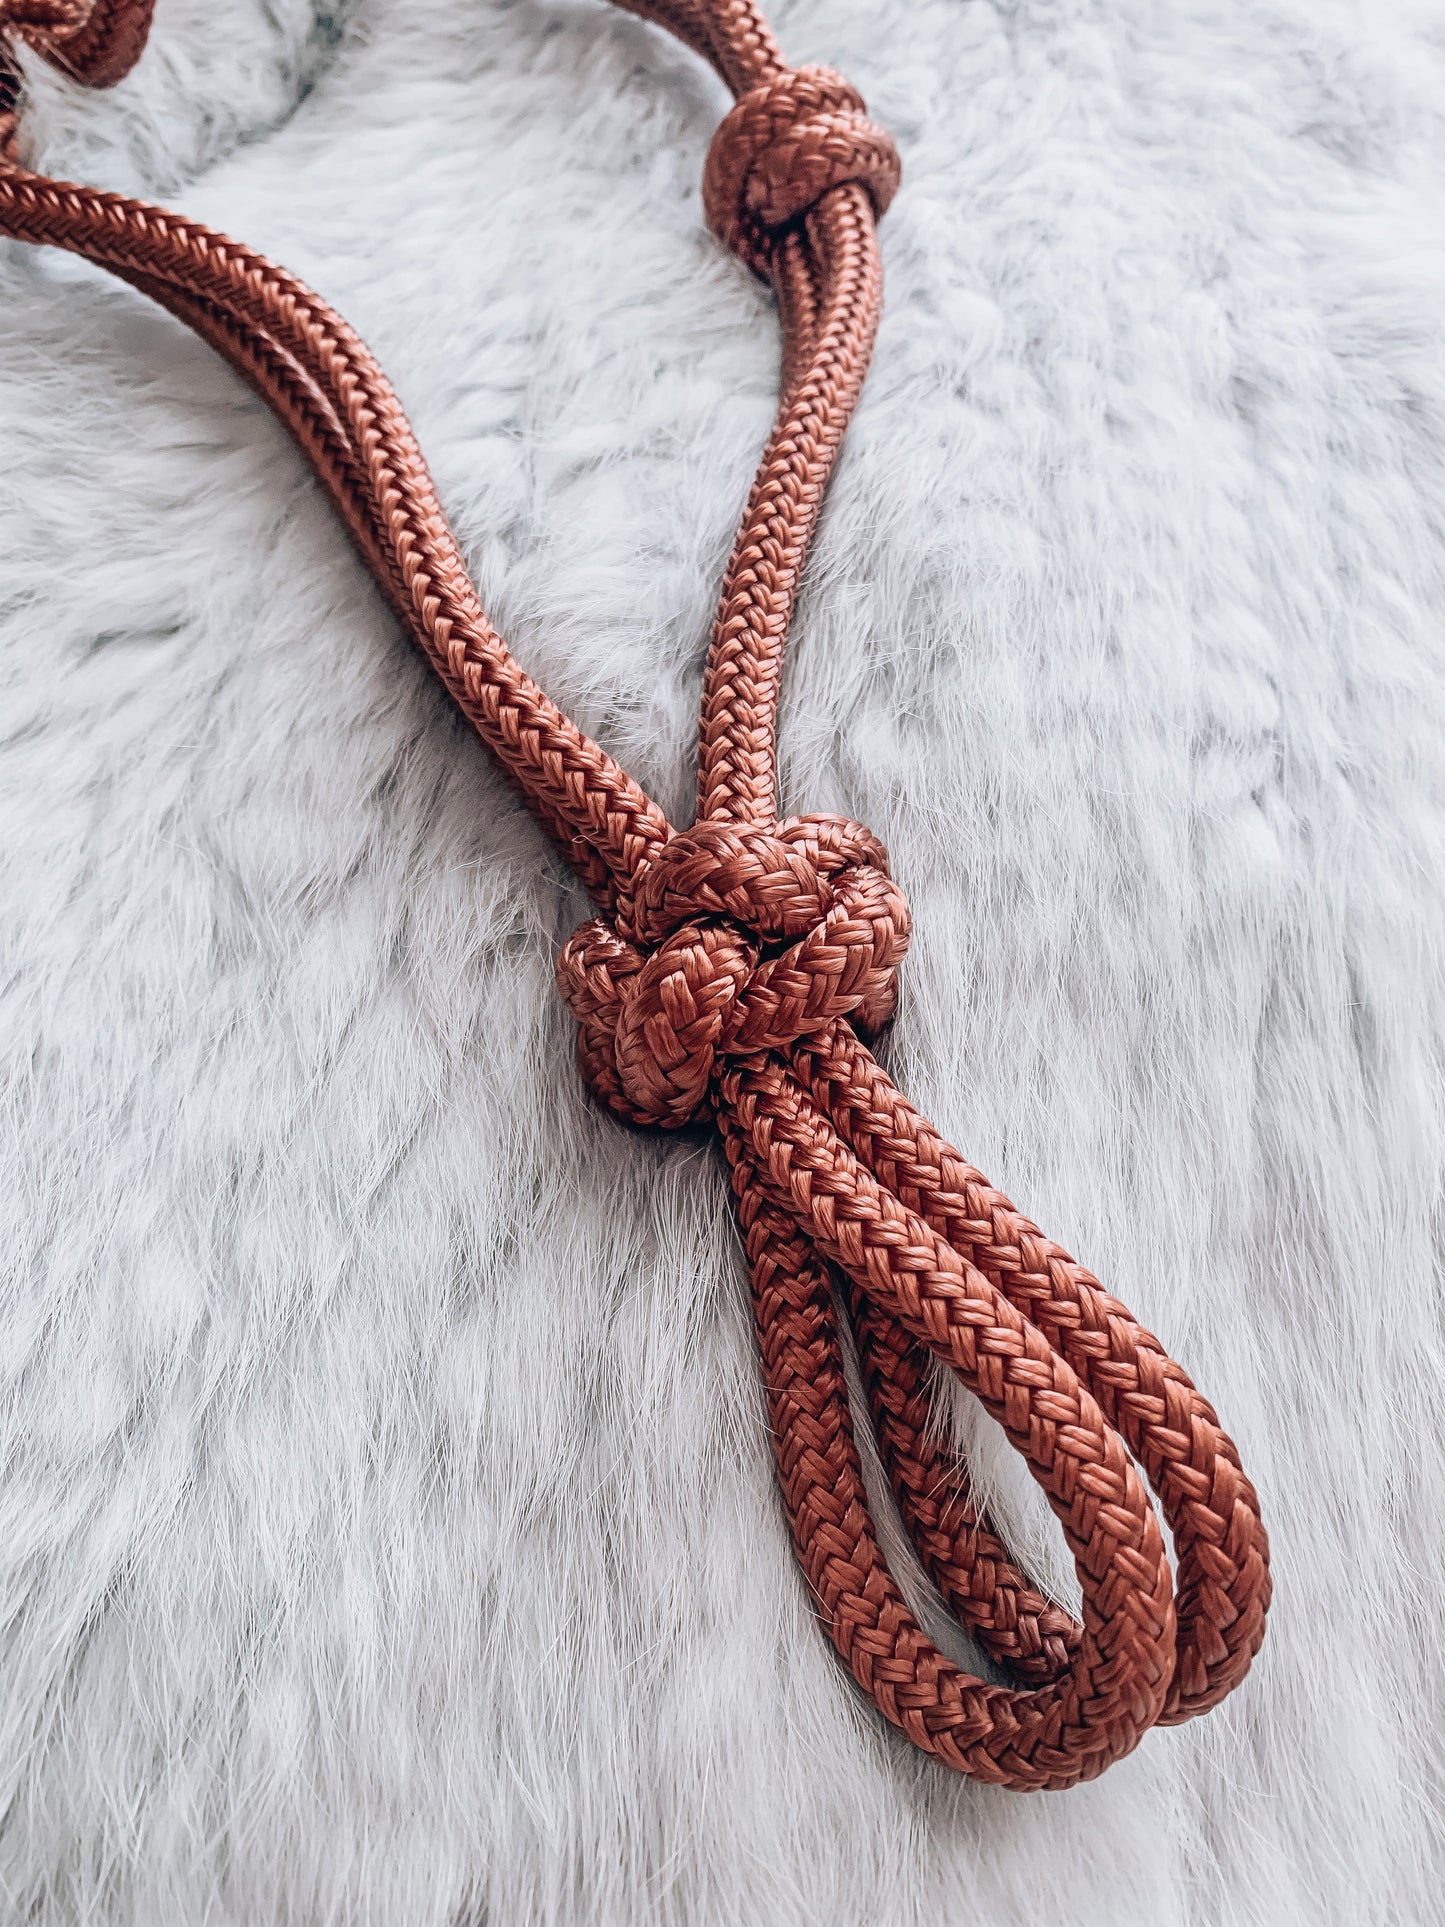 Overlay Halter - "ROSE GOLD X COCONUT ROUGH"